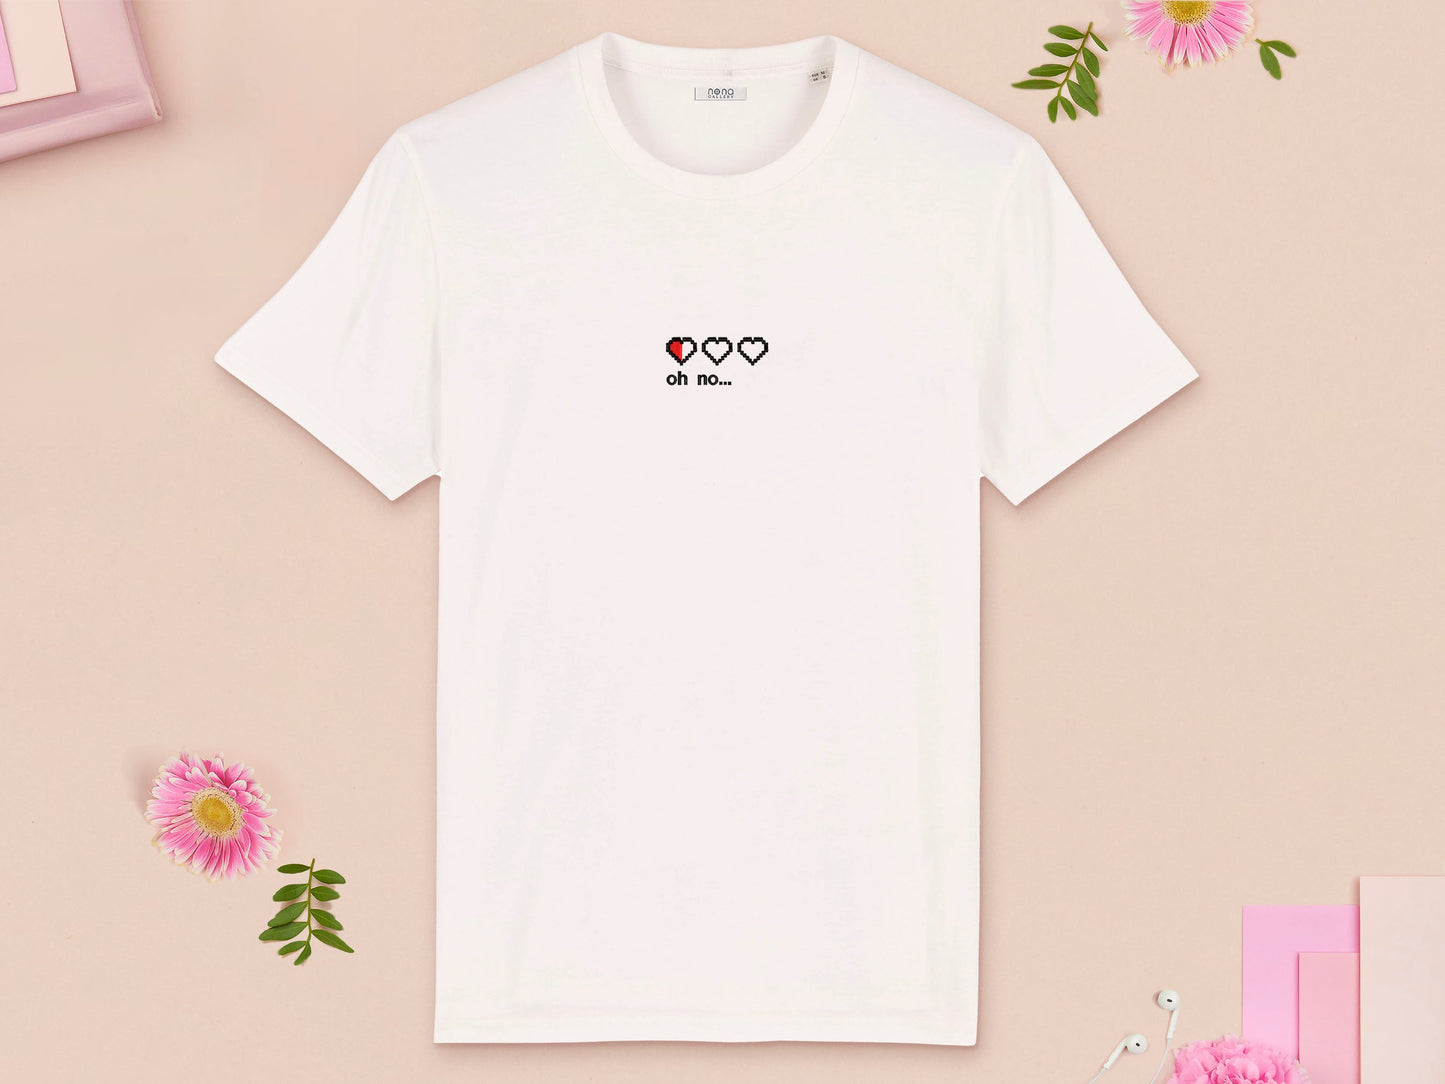 A white short sleeved t-shirt with an embroidered red and black design of almost empty gaming health hearts and the text oh no...